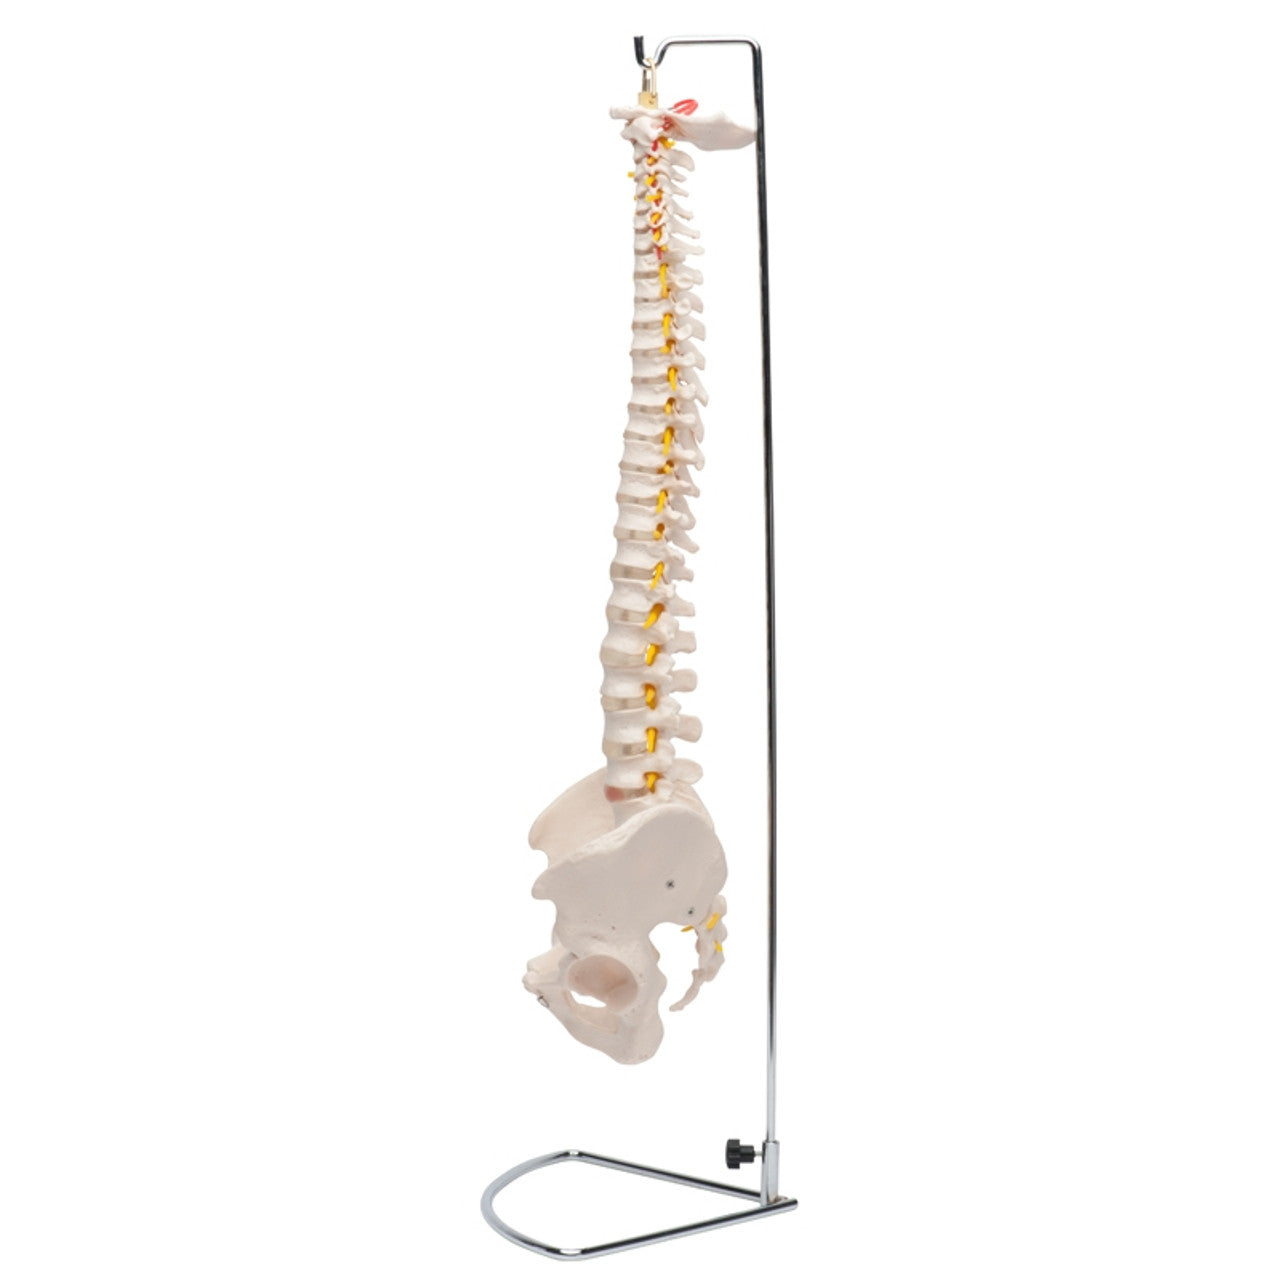 Premier Flexible Spine Model with stand